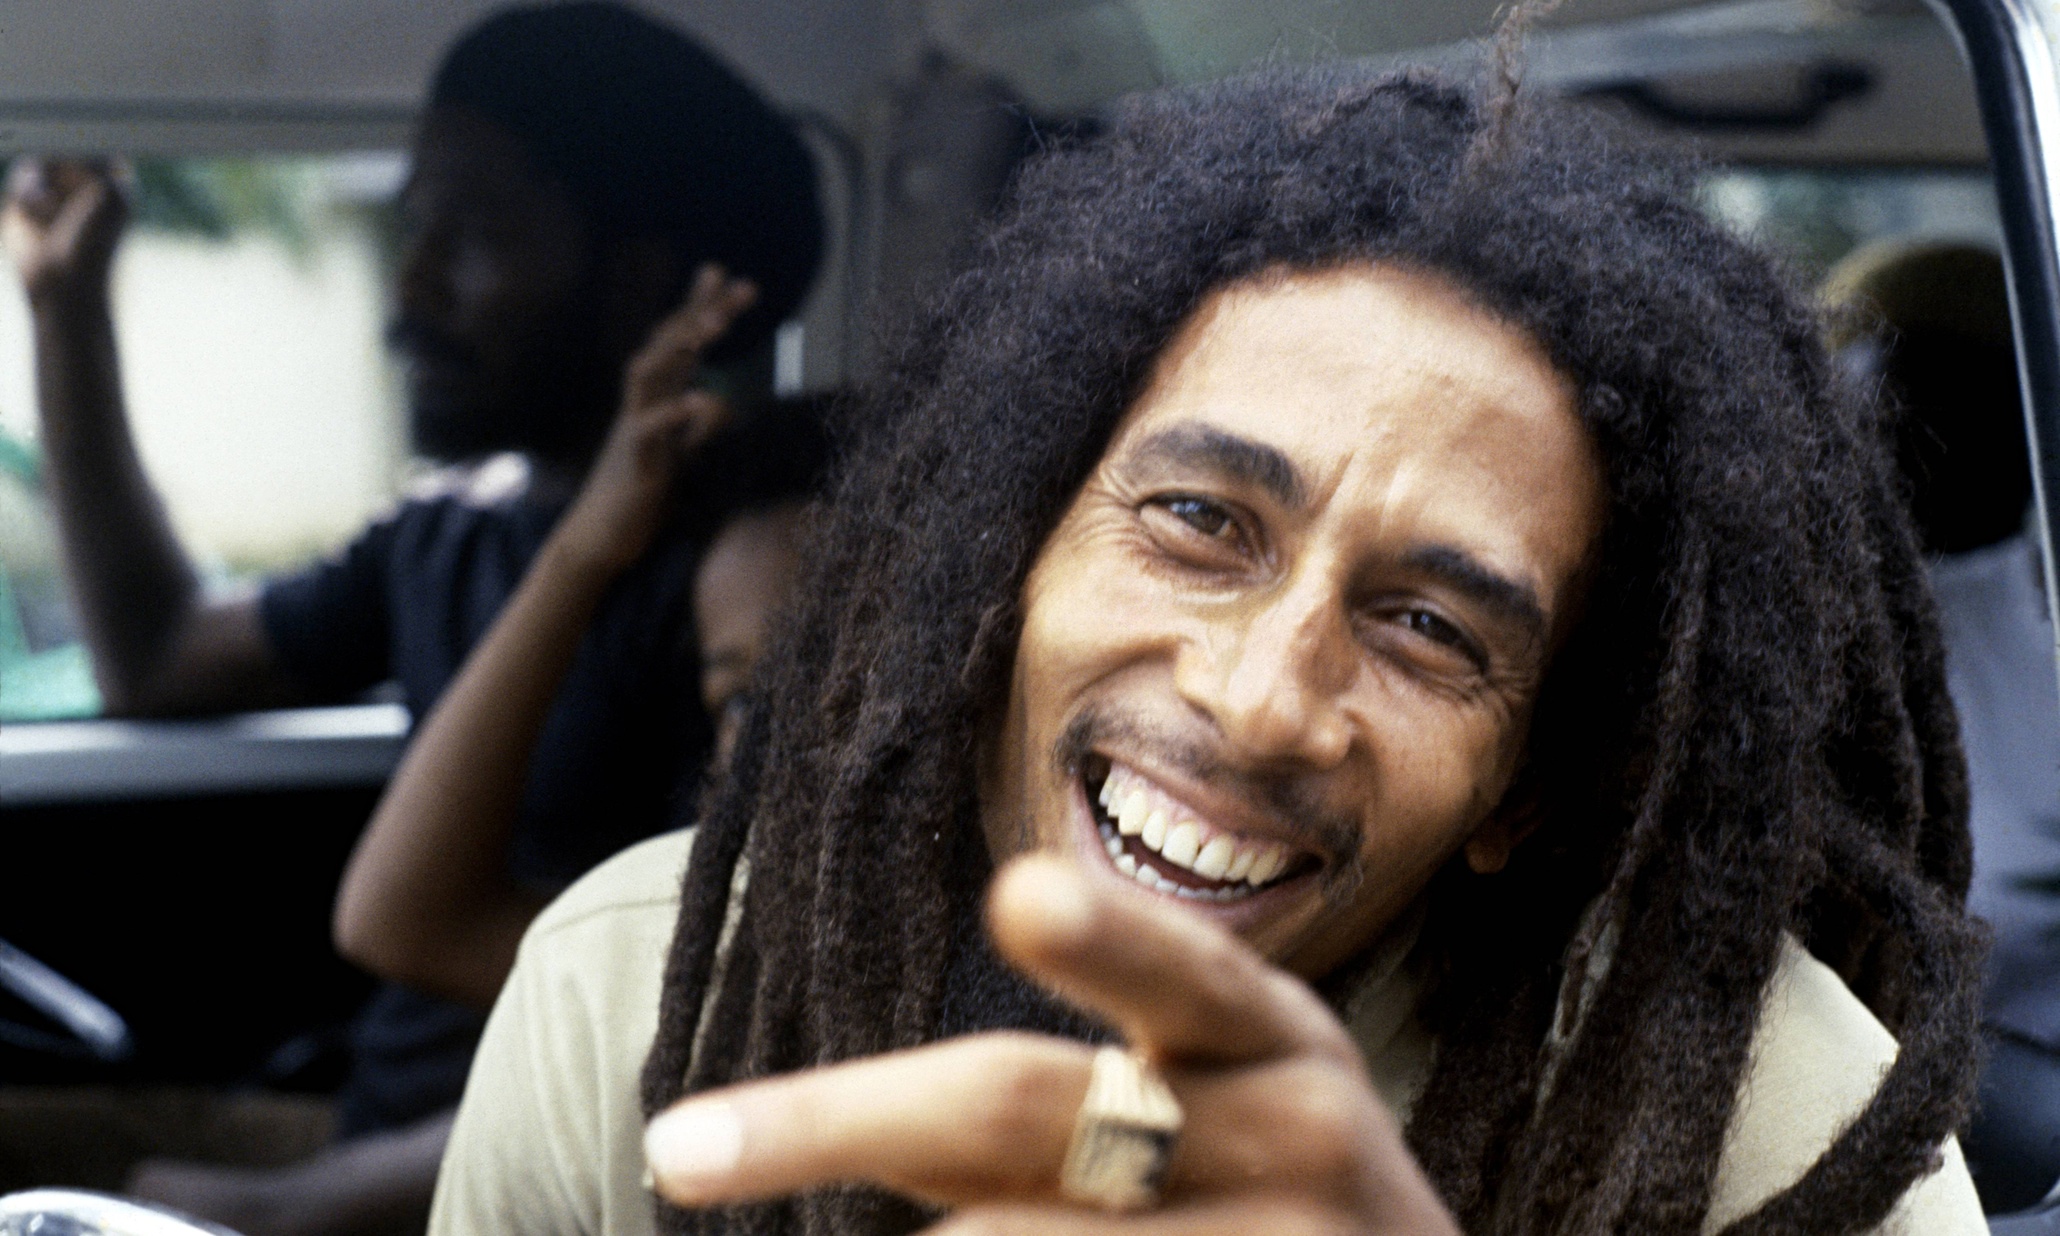 Bob Marley at 70: legend and legacy | Music | The Guardian2060 x 1236